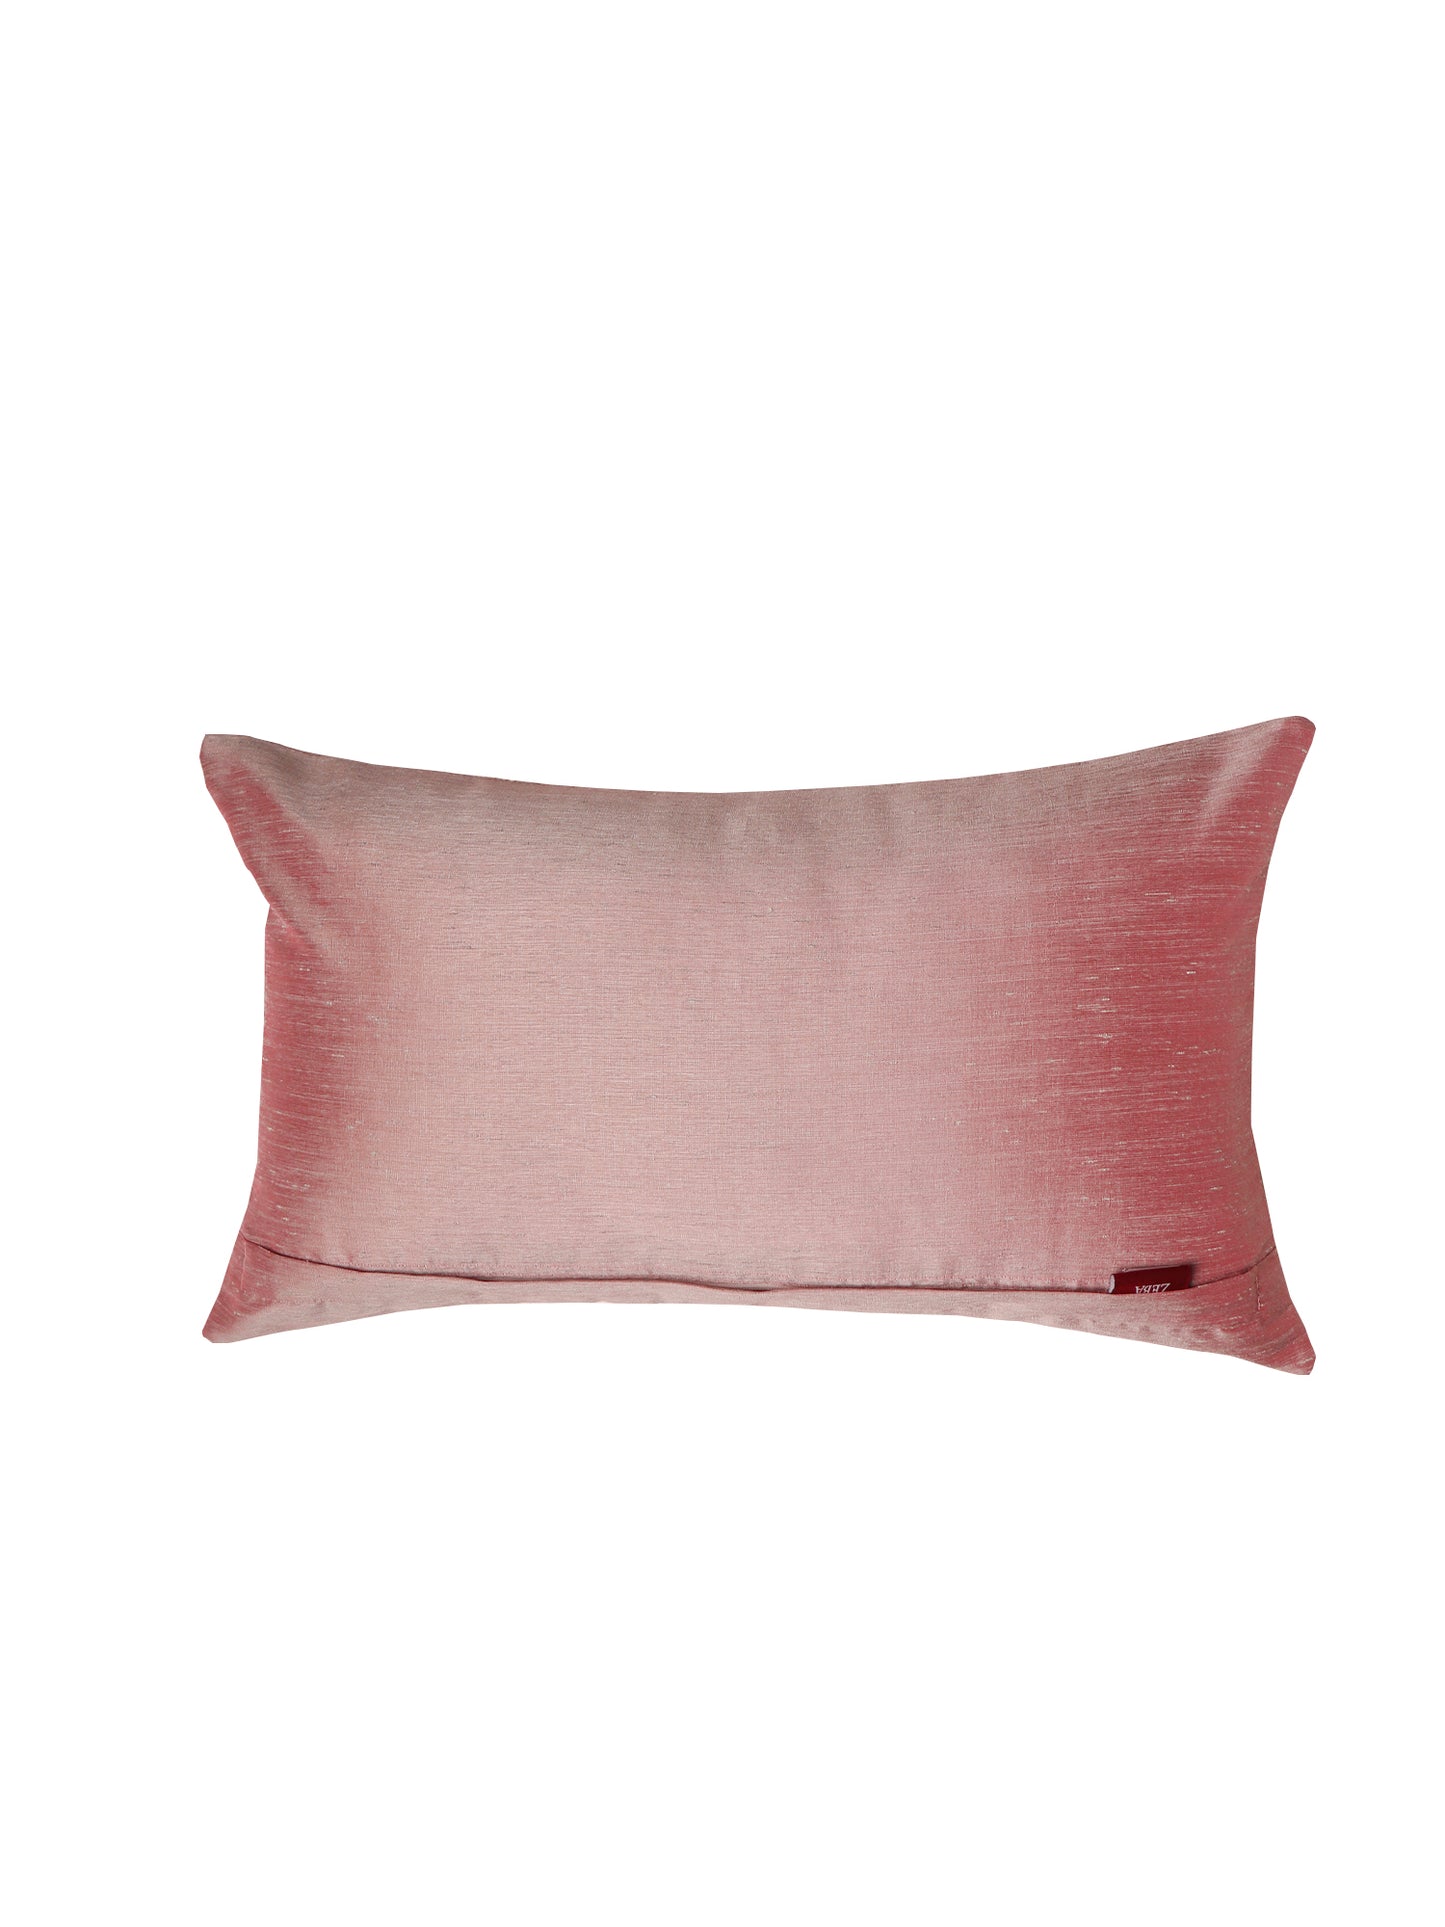 Cushion Cover Polyester Self Quilting with Embroidery Pink - 12"x 20"